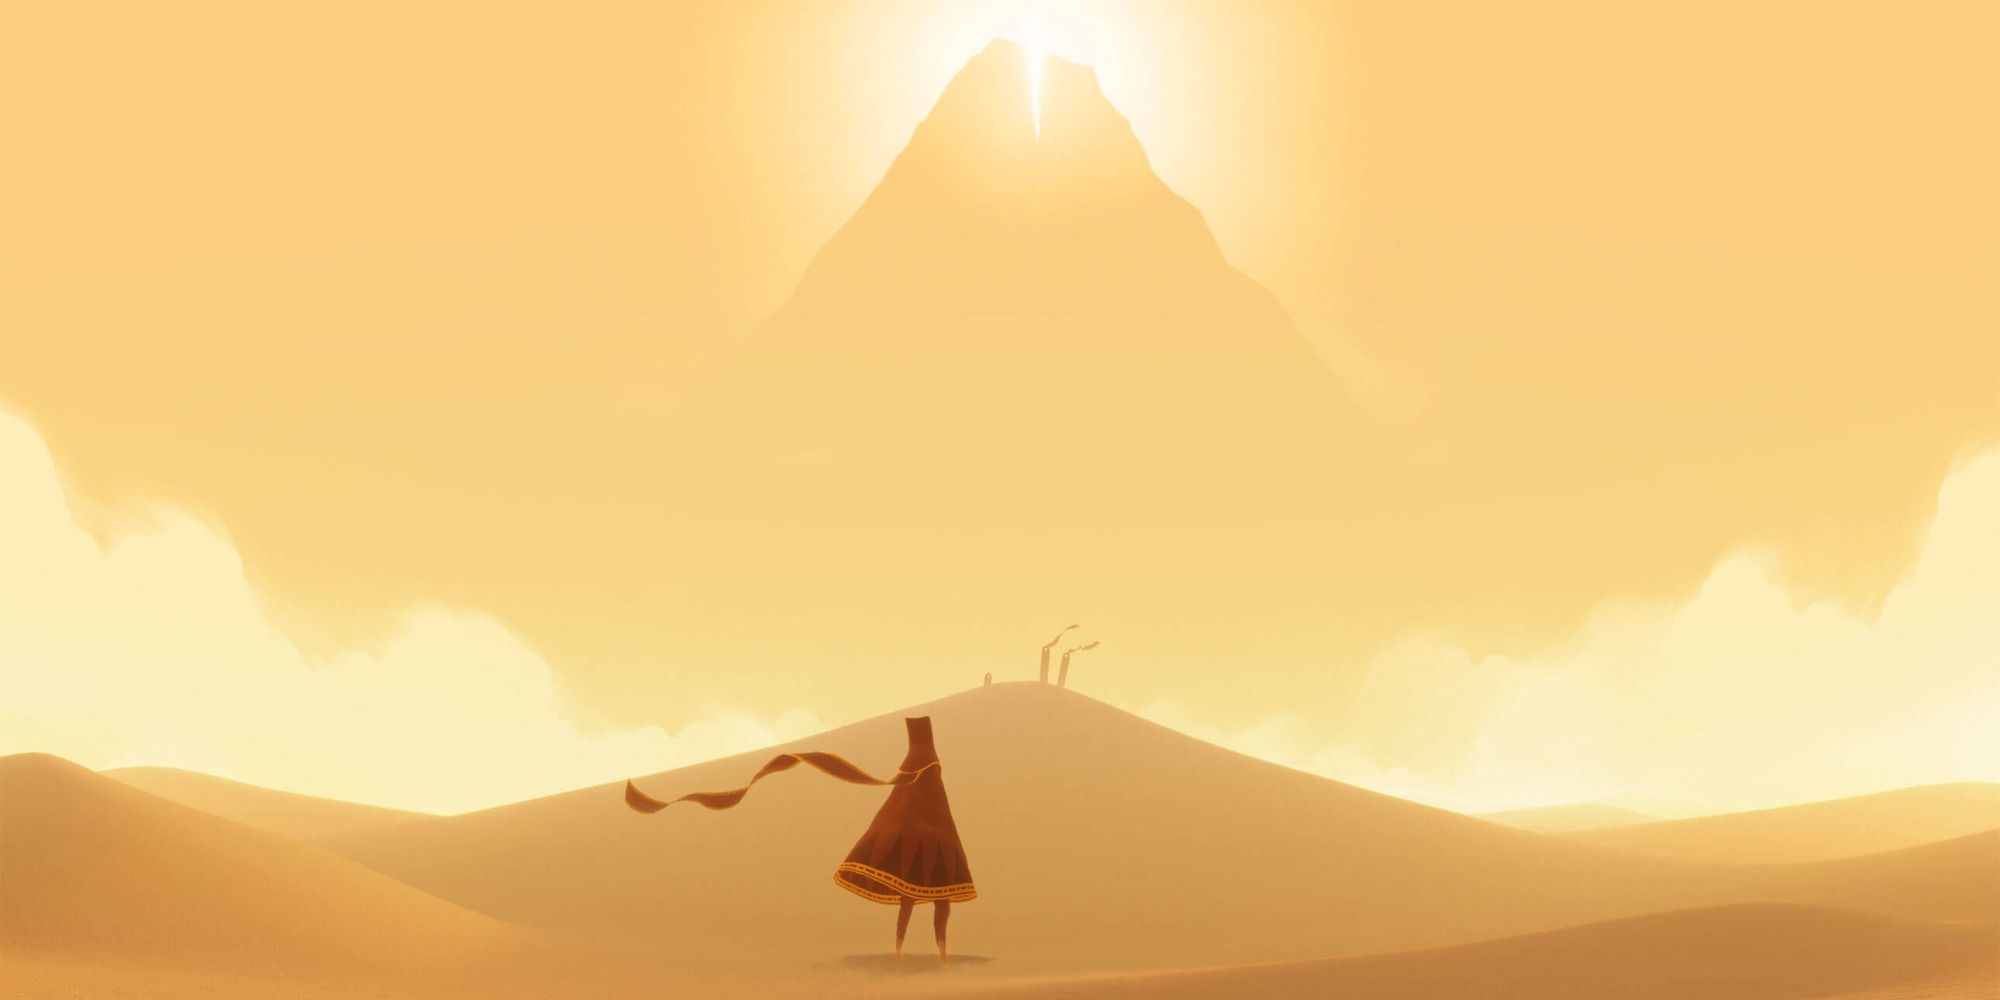 Journey character center with desert surrounding them and mountain on the horizon